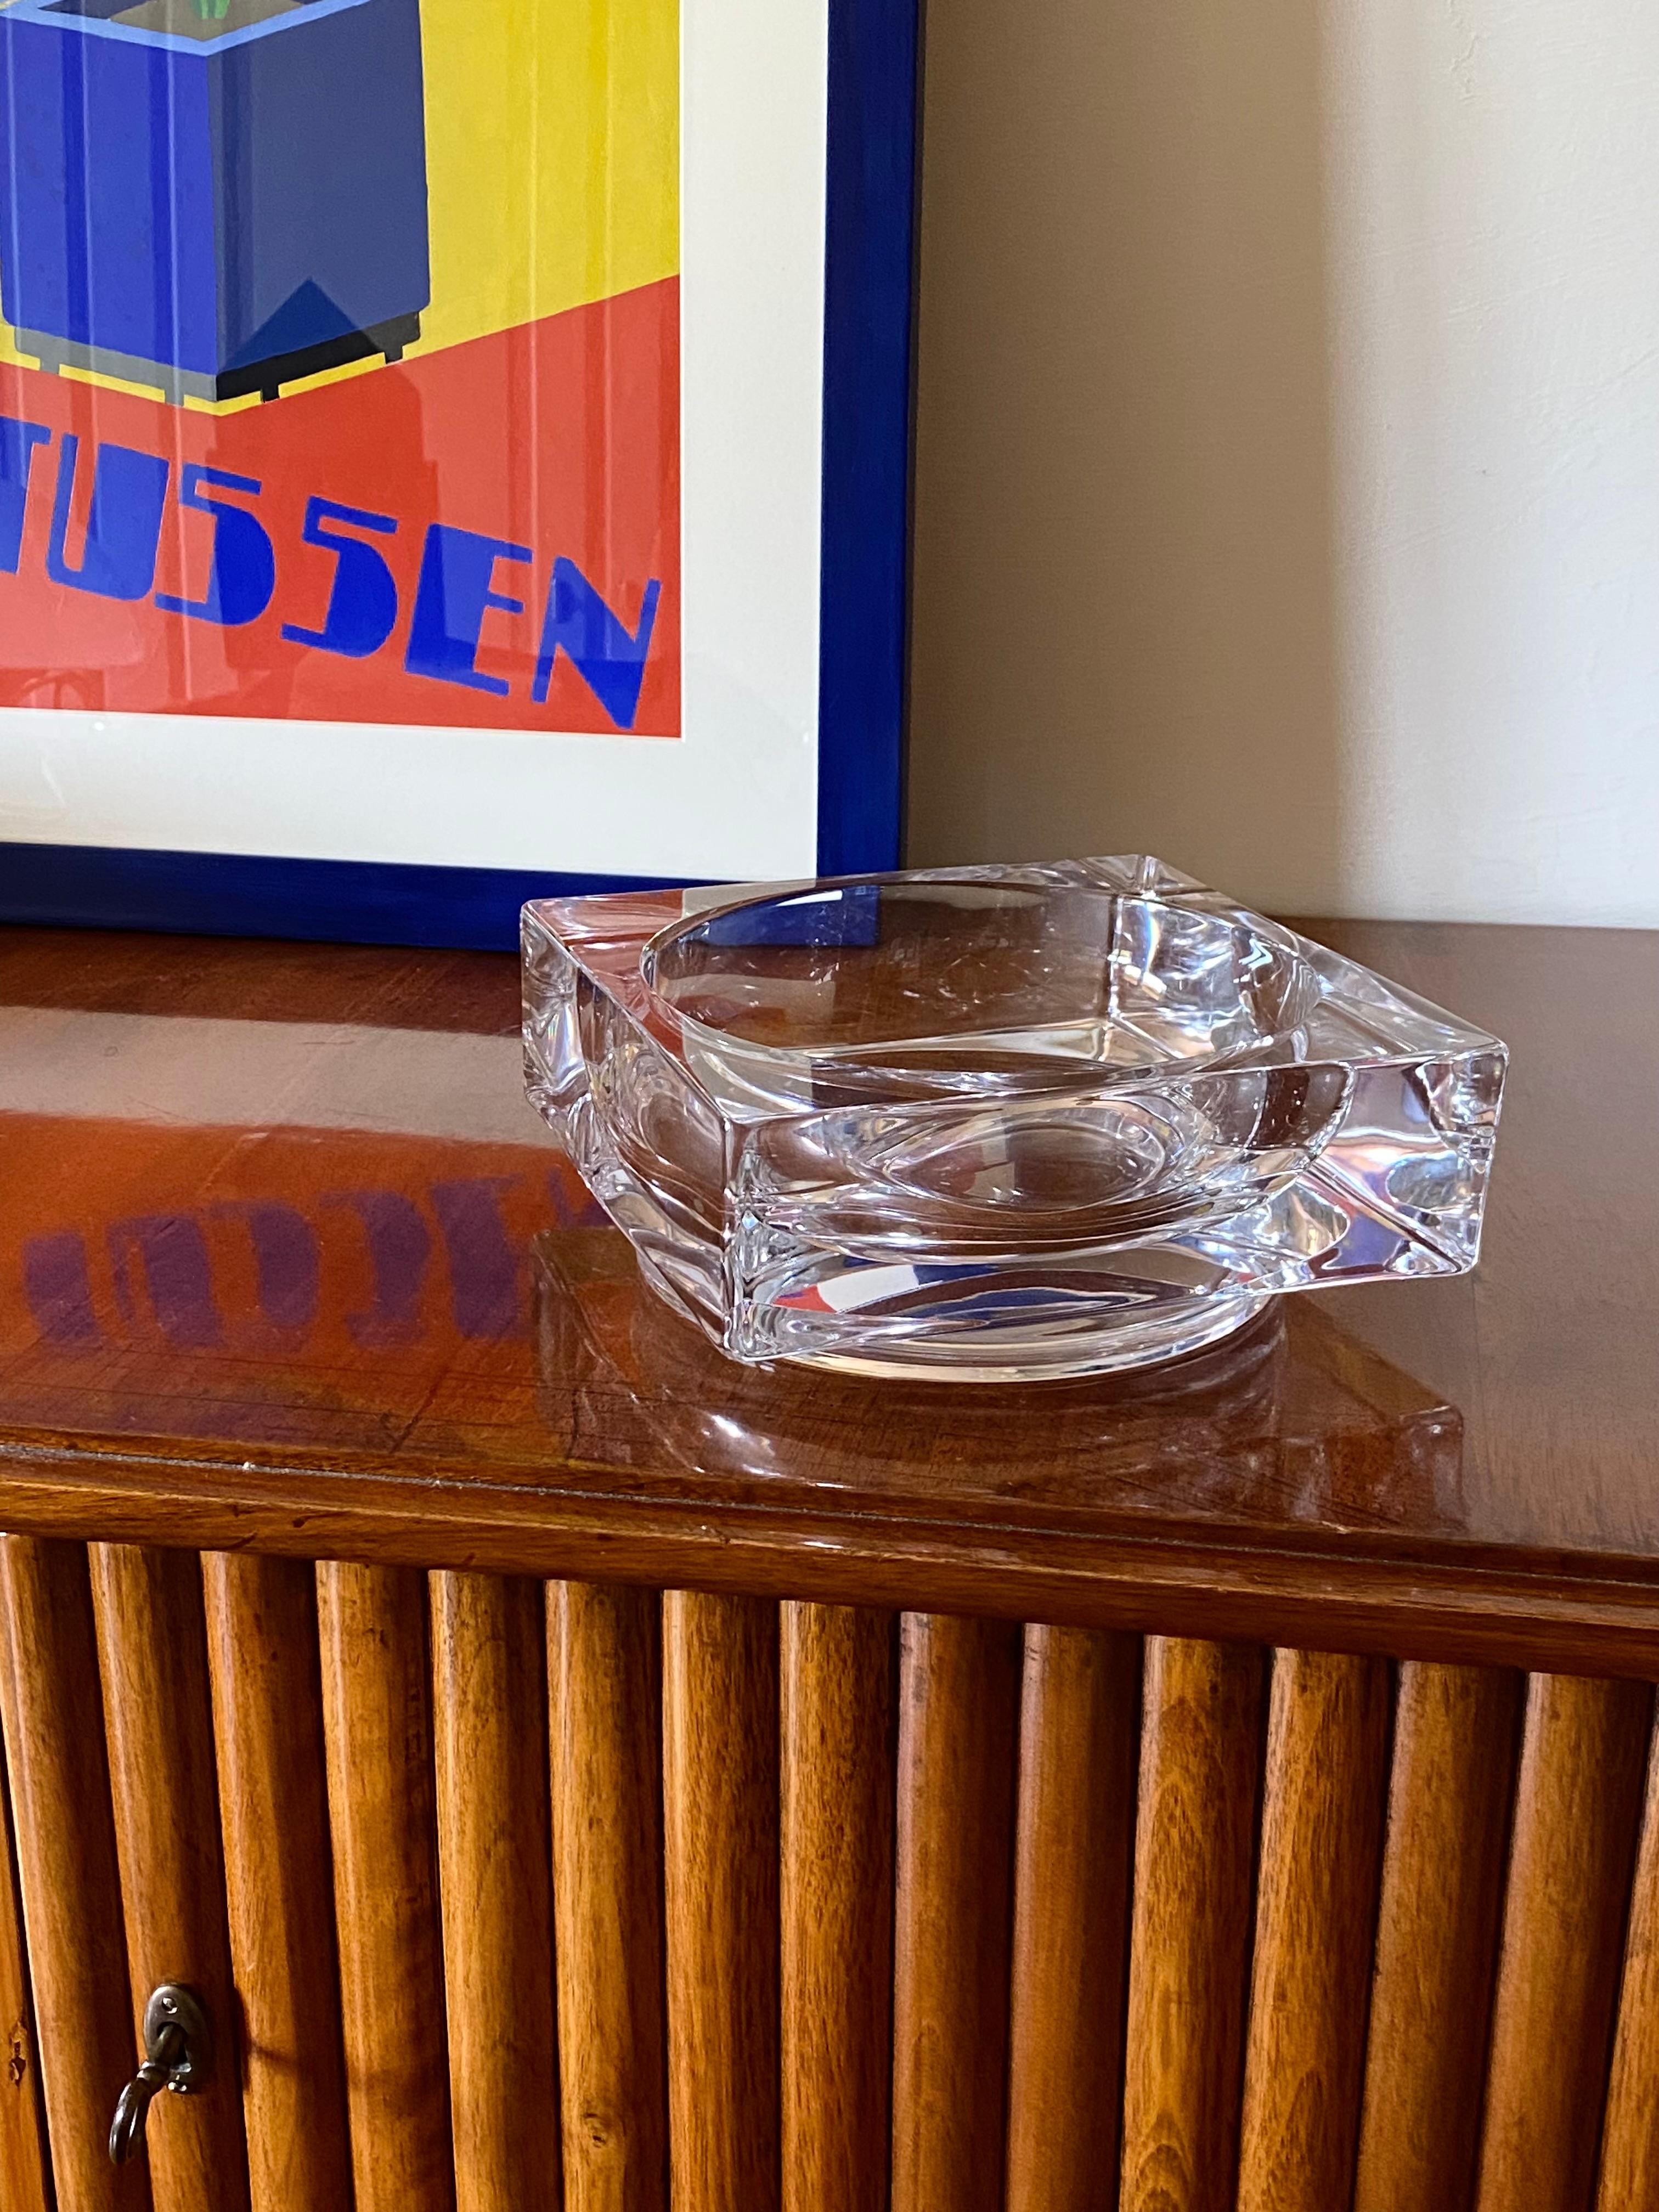 Monumental molded crystal ashtray

Cristal de Sevres, France 1970s

Large cubic shape on a circular base, with a modernist design

Acid signed 'Sevres'

H 8.5 cm - 20 x 20 cm

Conditions: excellent, no defects